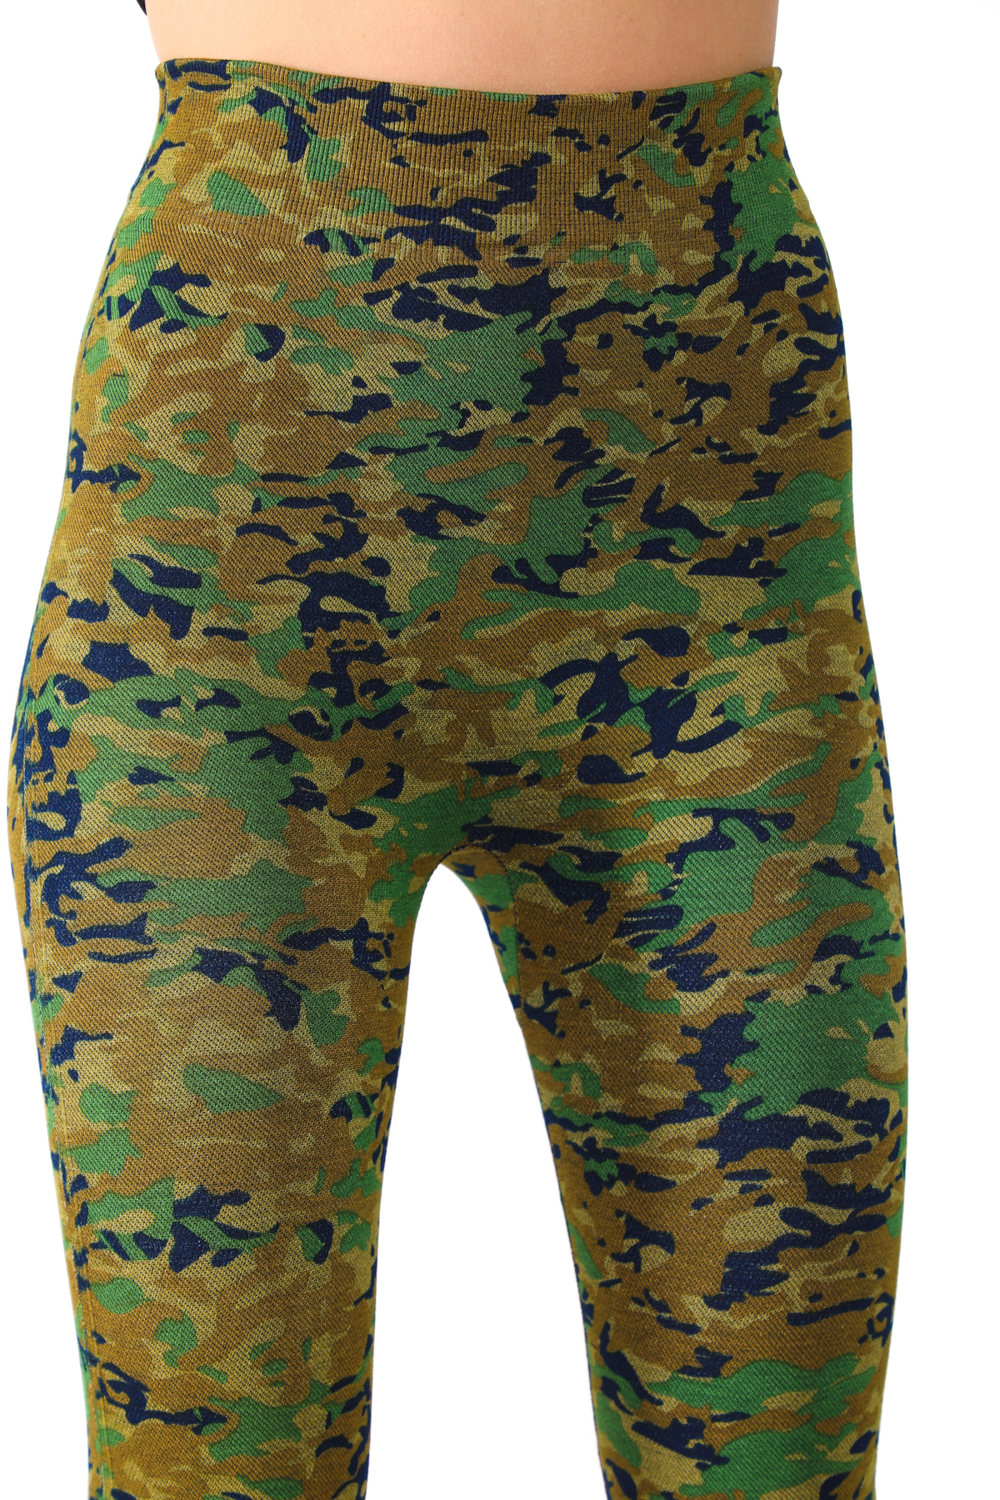 Denim Leggings with Olive Color Camo Pattern - 6